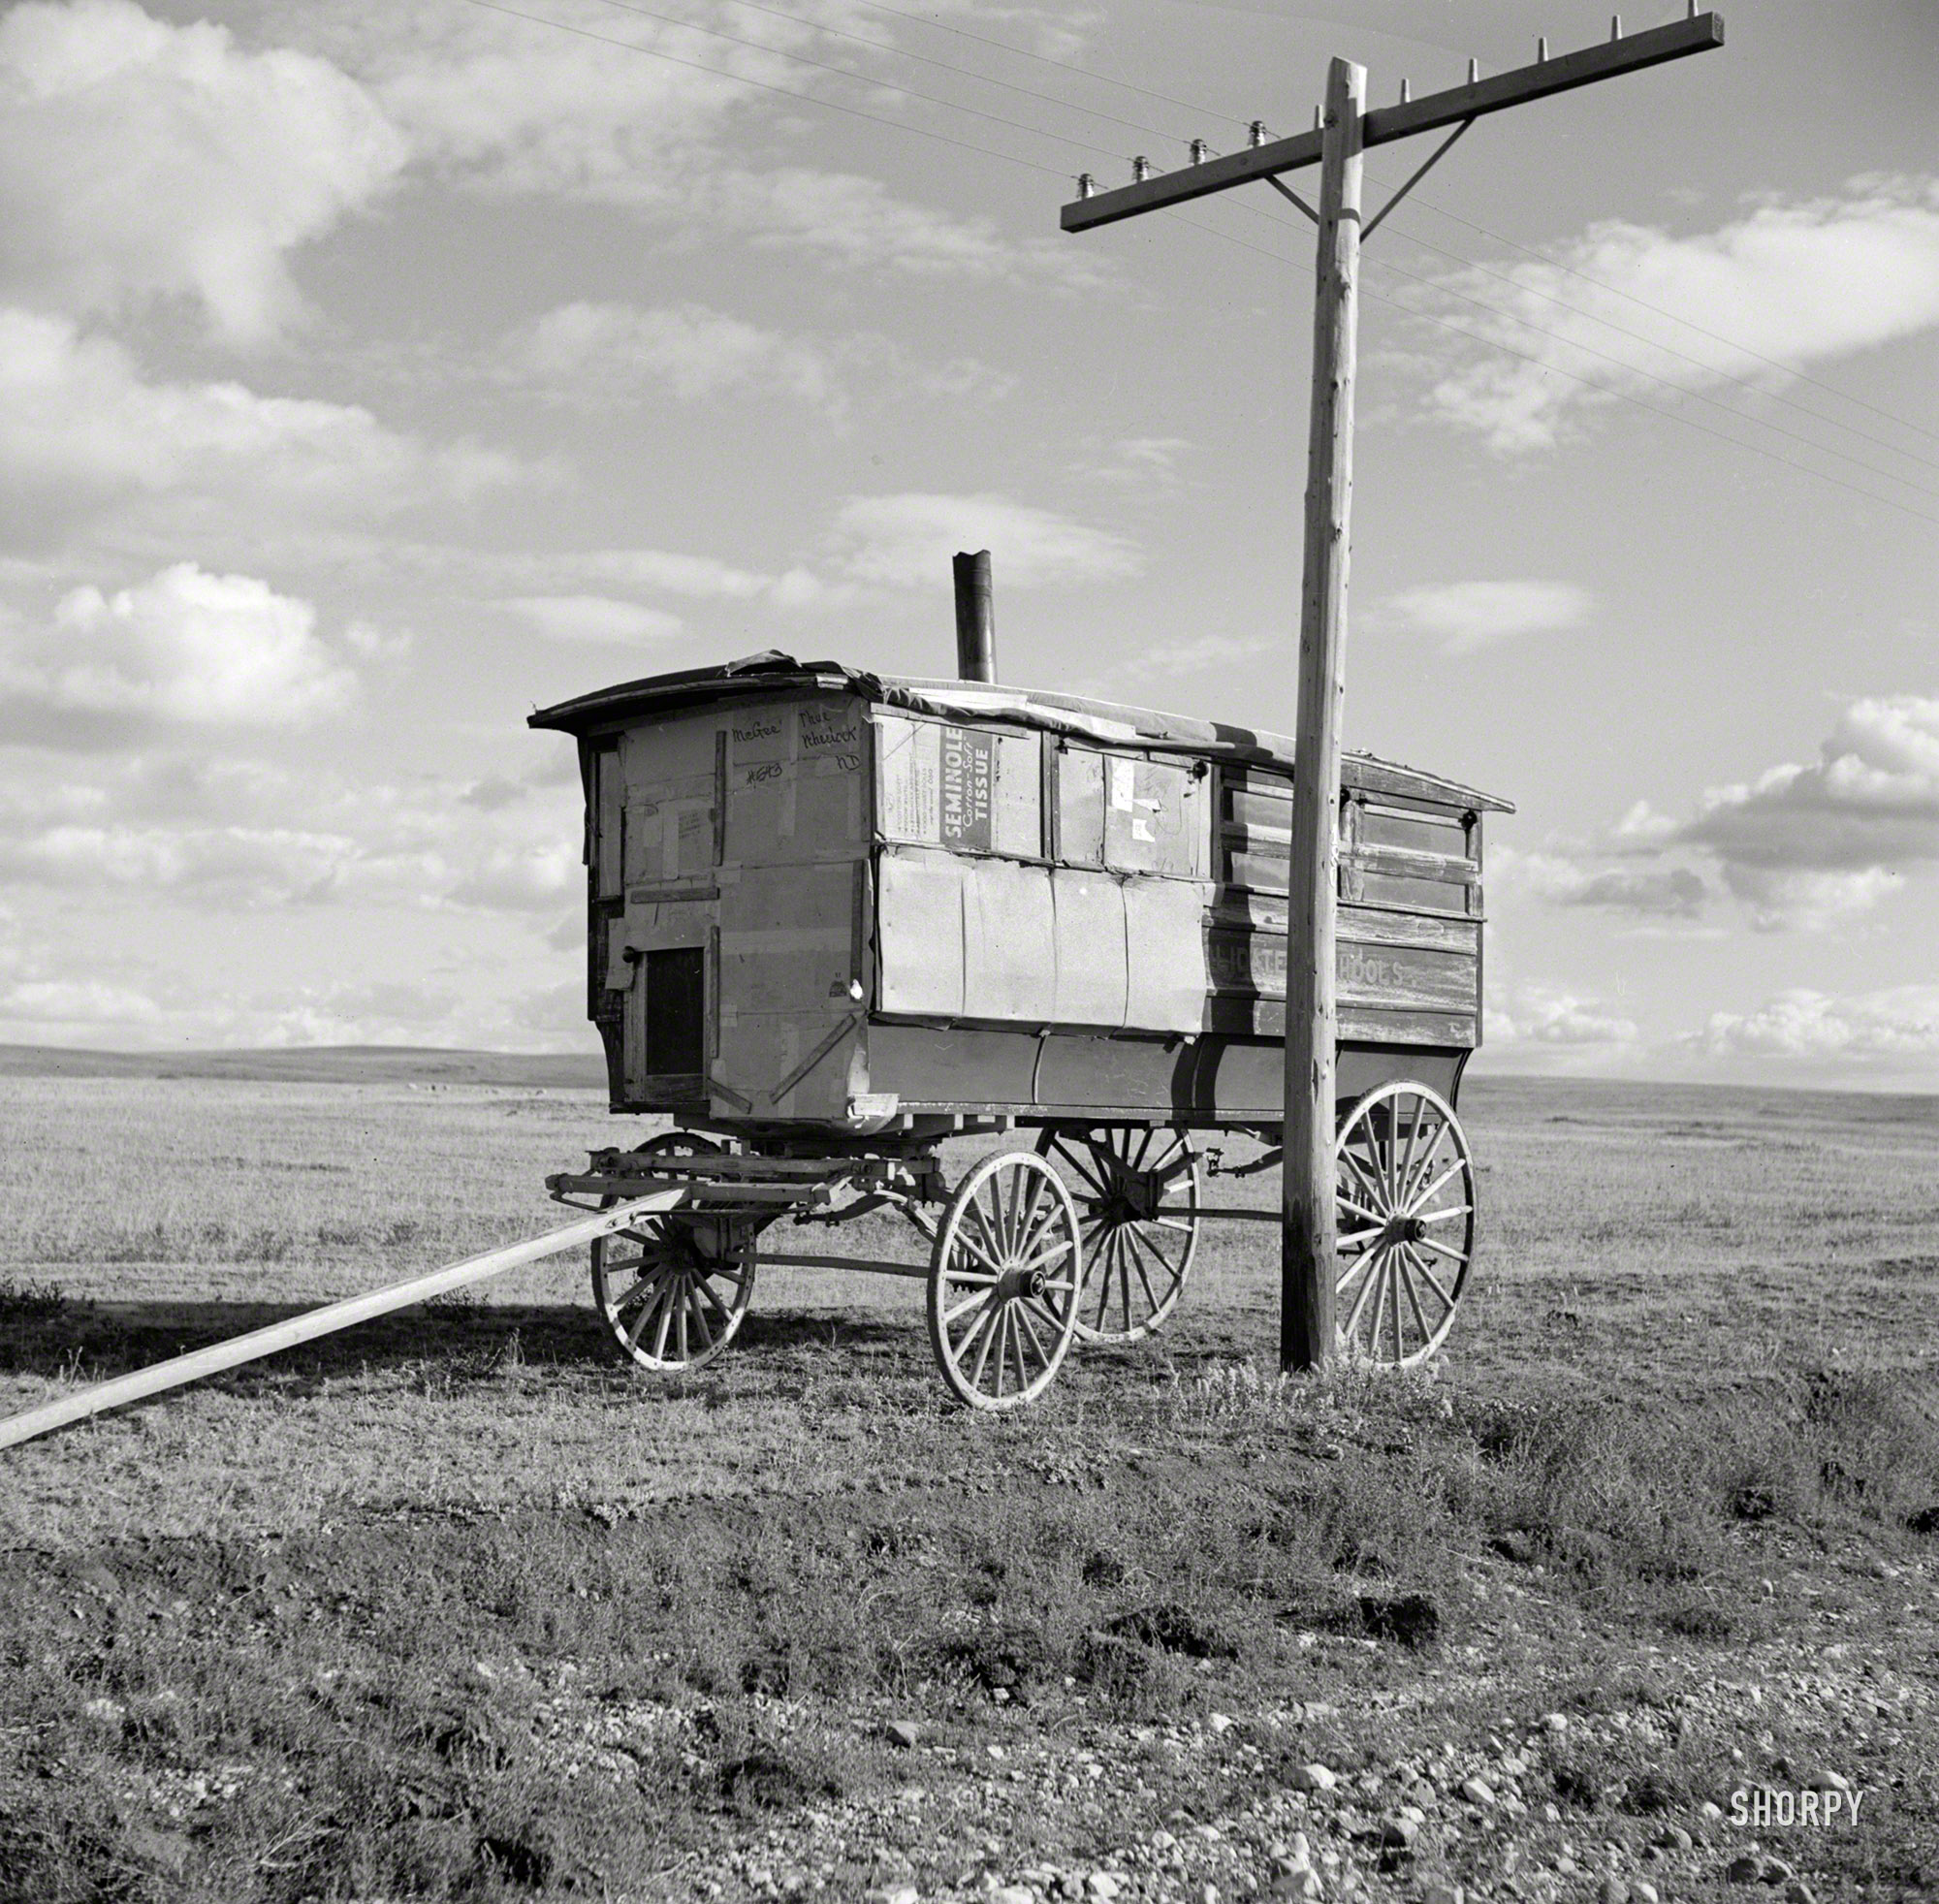 October 1937. "Old school bus. Williams County, North Dakota." Medium-format negative by Russell Lee for the Farm Security Administration. View full size.